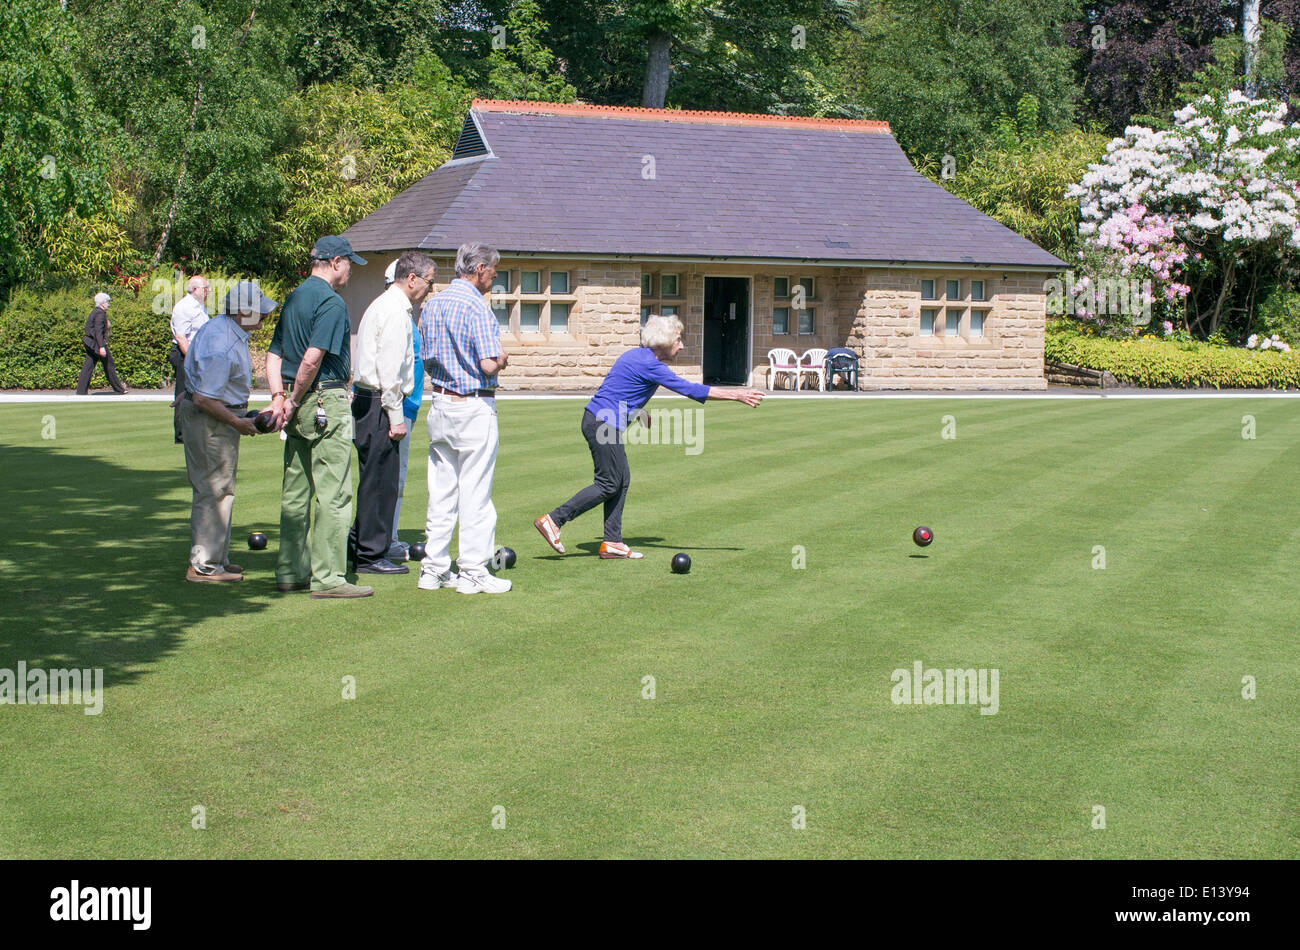 People playing crown green bowls in Roundhay Park, Leeds, West Yorkshire, England, UK Stock Photo